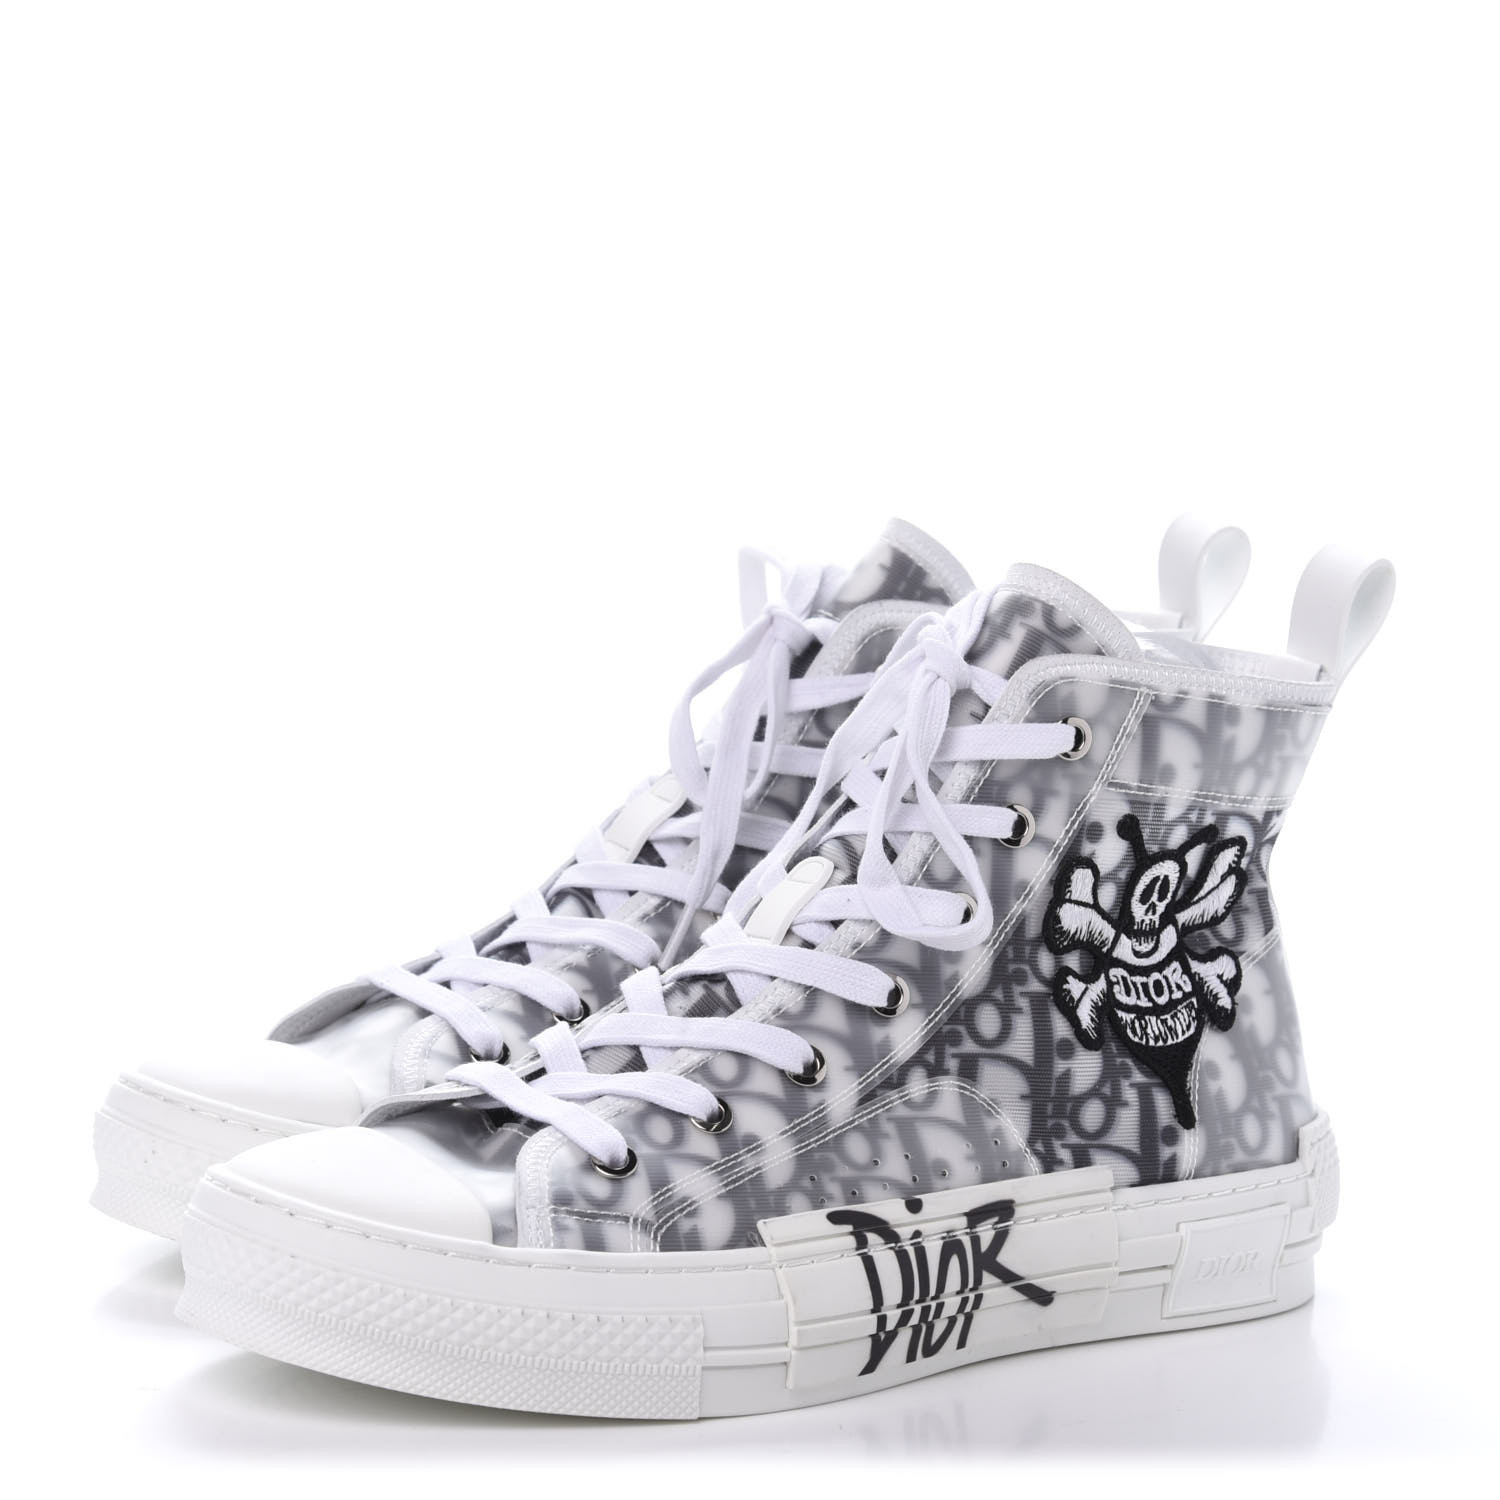 CHRISTIAN DIOR Canvas Oblique Shawn Bee Mens B23 High Top Sneakers 42 ...